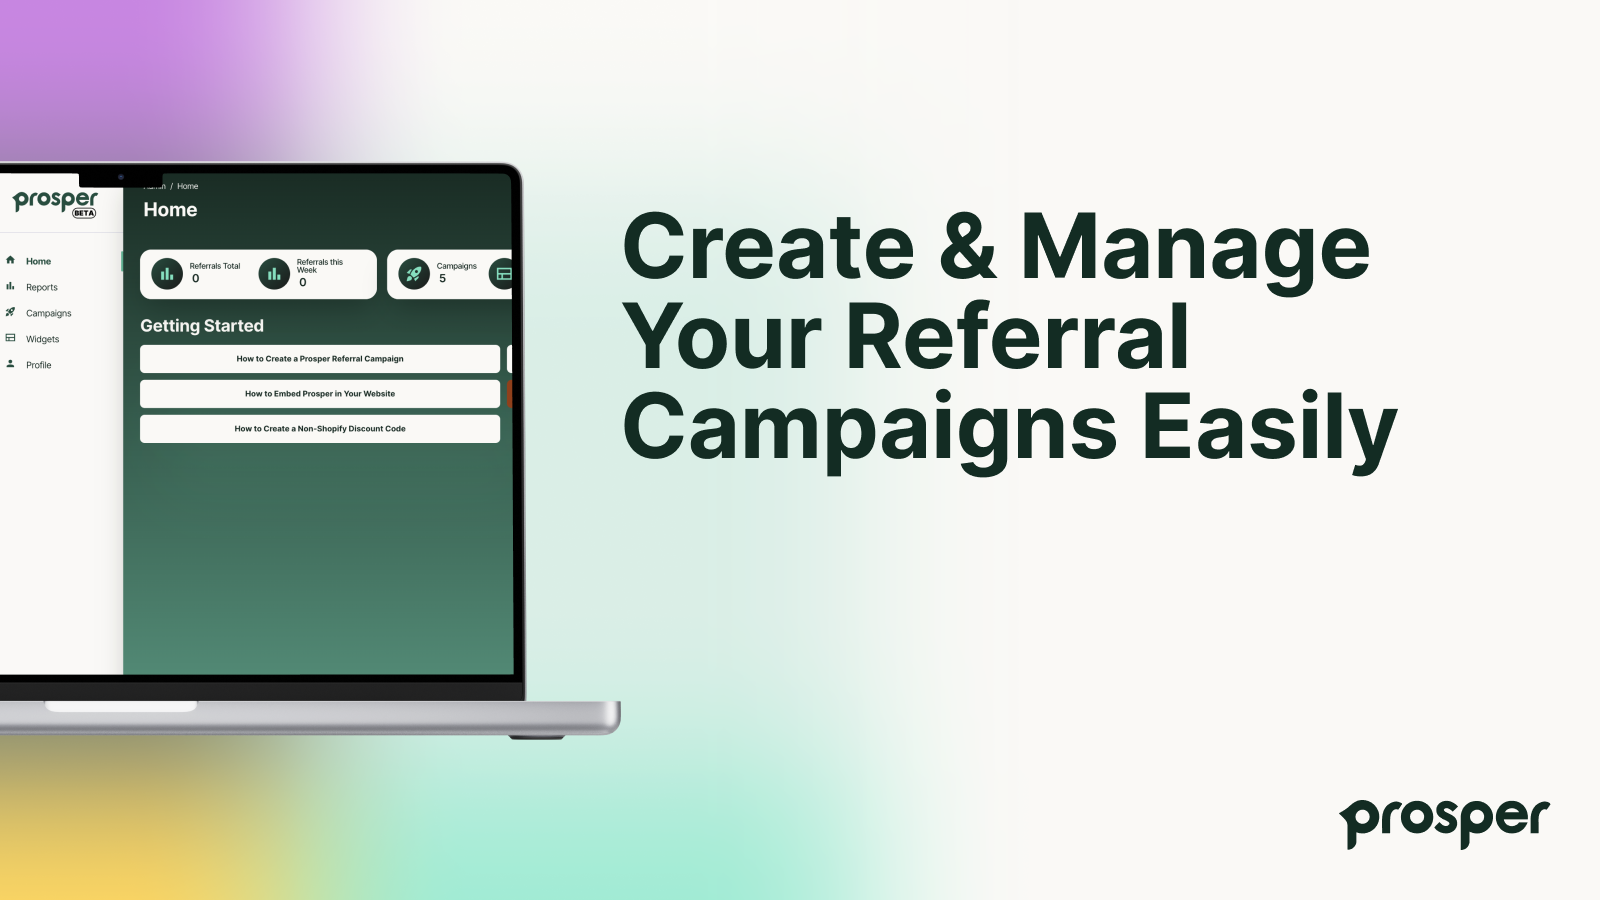 Create and Manage Your Referral Campaign with Prosper